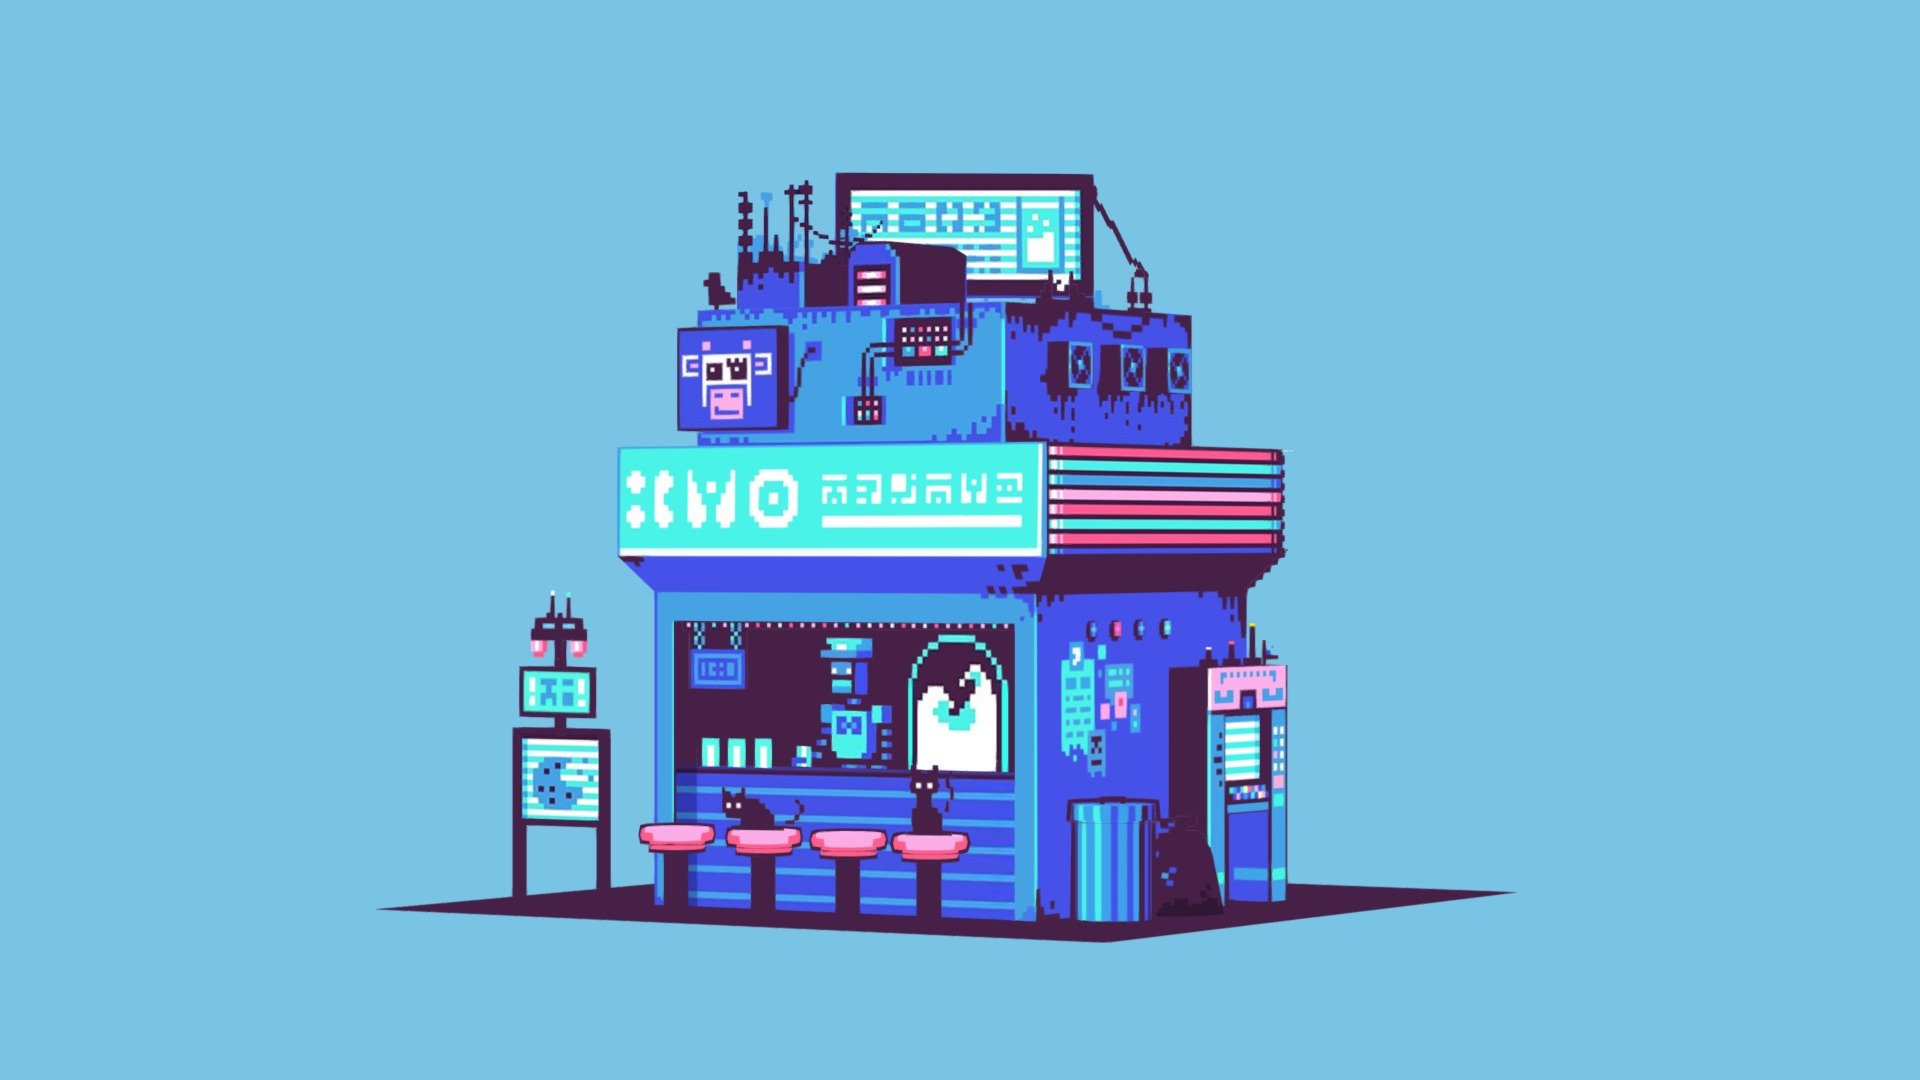 Quick model to practice 3D and pixel art, based on a concept by Brandon James Greer 
His twitter account :@BJGdesign and instagram: @brandonjamesgreer

Follow me on twitter @Owakita_ - Pixel Storefront - 3D model by Elora Pautrat (@EloraP) 3d model